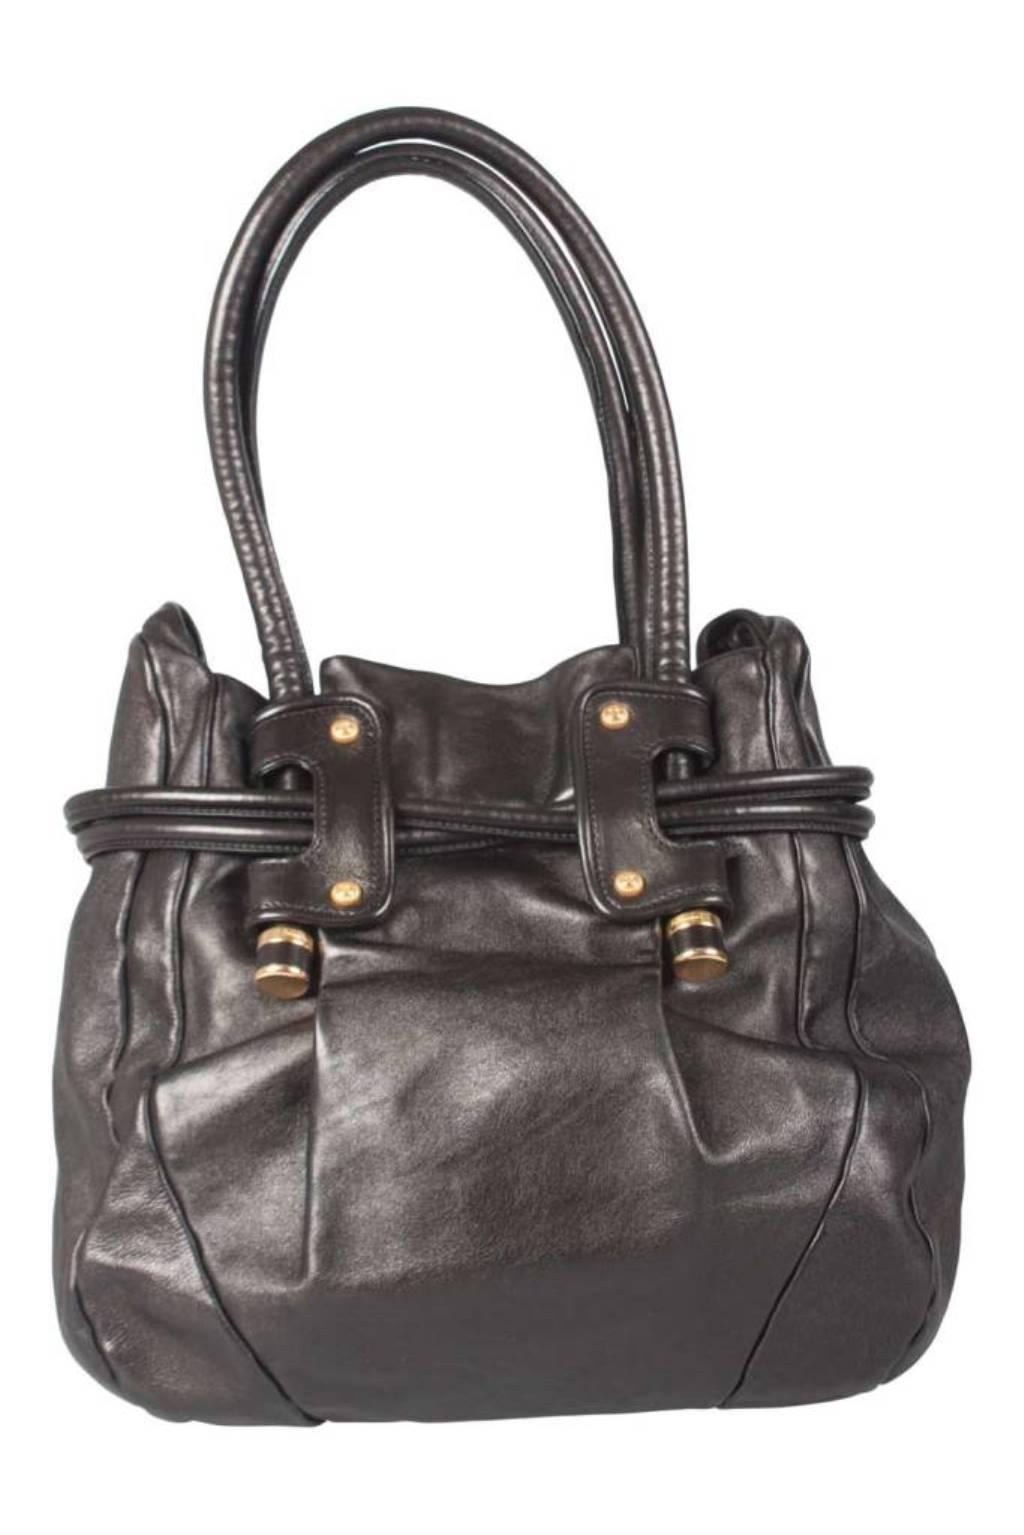 This Salvatore Ferragamo hobo is built for everyday use. Crafted from black leather, it has two handles for you to parade it. The nylon interior is secured by a snap button and a drawstring detail is added to enhance the design of the bag.

